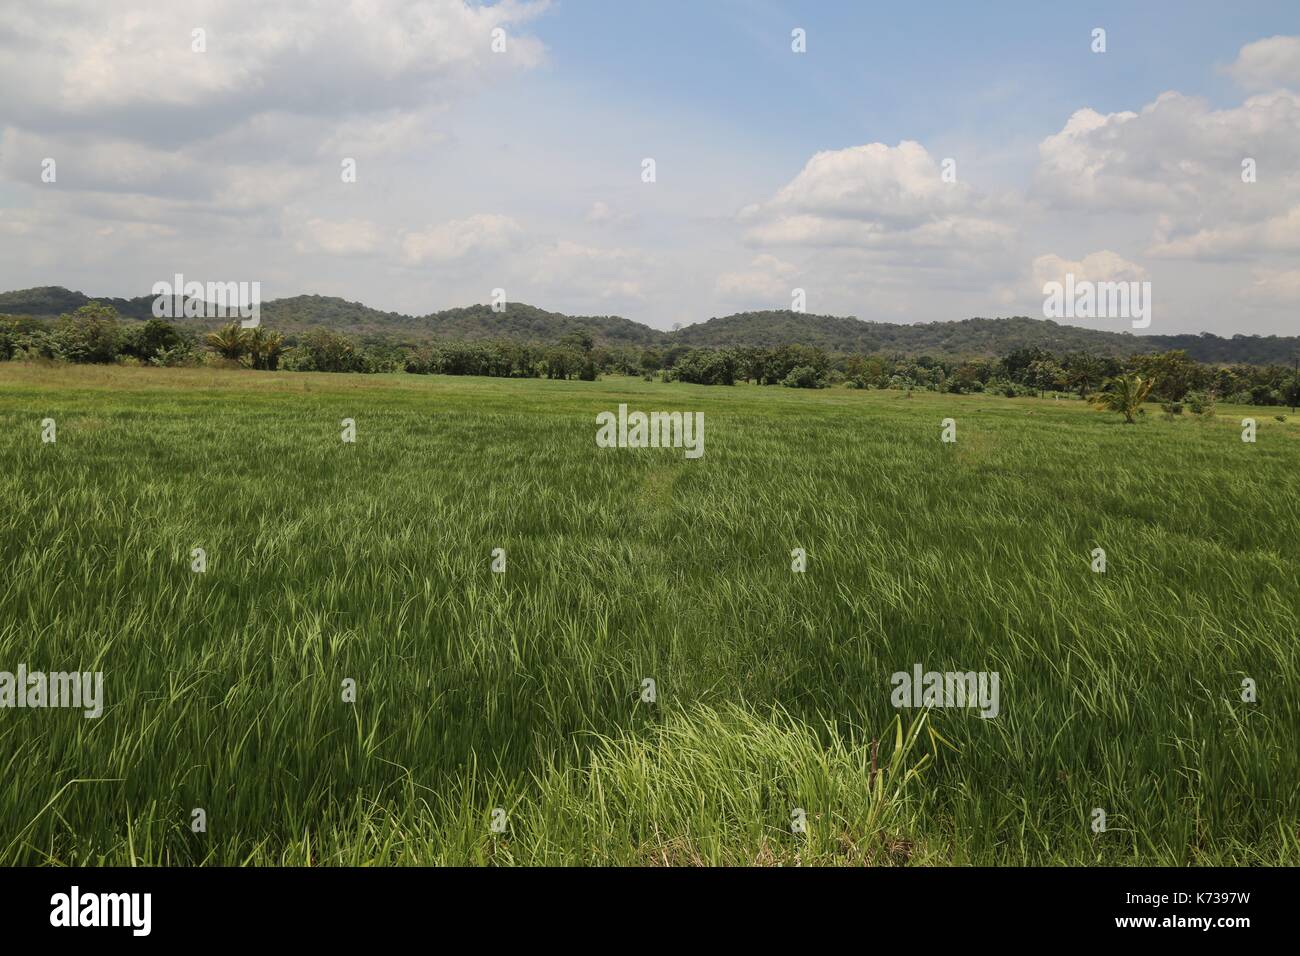 Rice Paddy Field, Central Sri Lanka, Mountains in the background Stock Photo